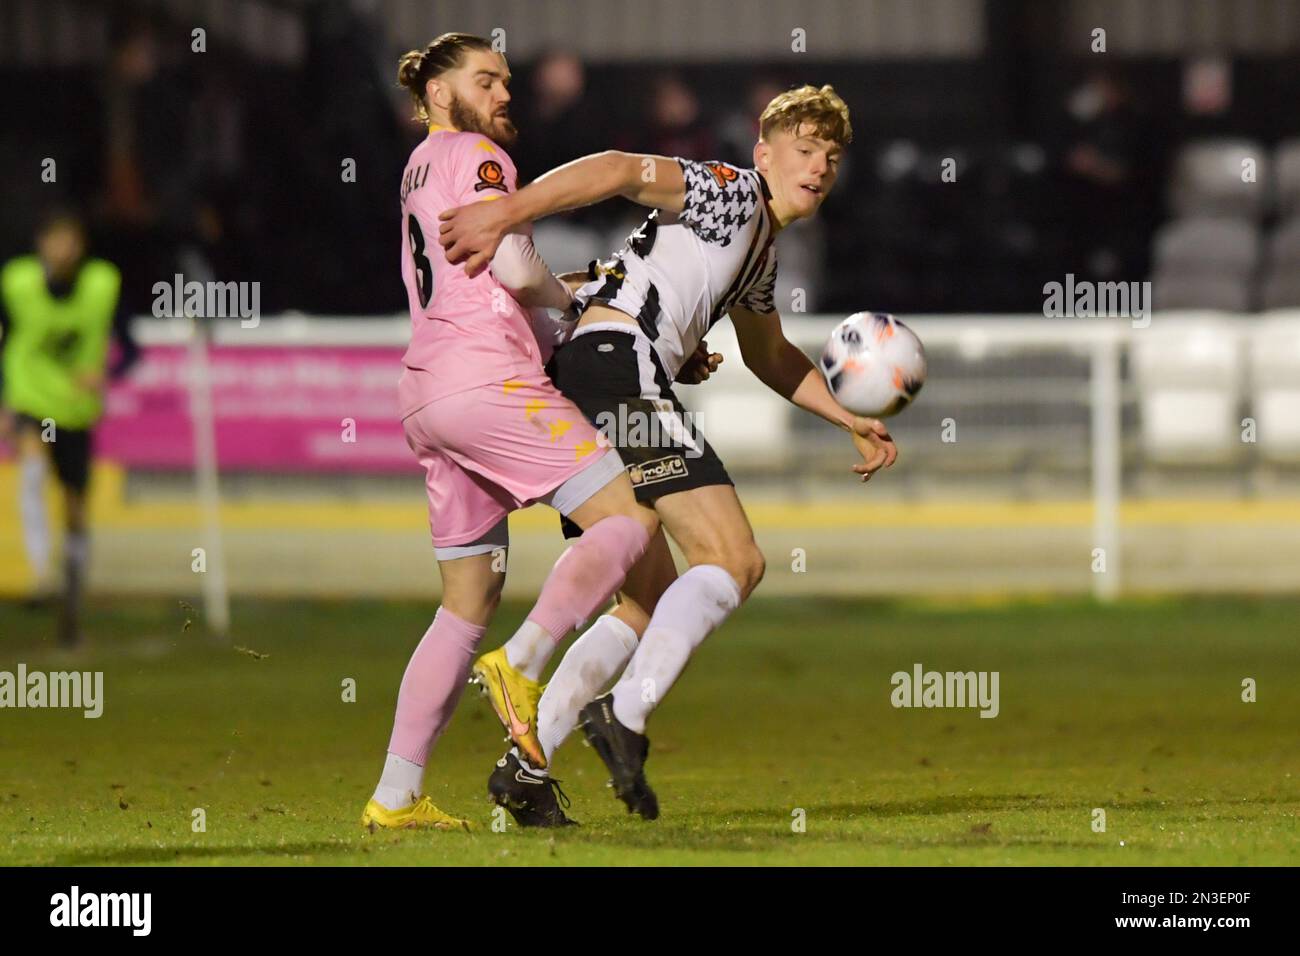 during the Vanarama National League North match between Spennymoor Town and Kings Lynn at the Brewery Field, Spennymoor on Tuesday 7th February 2023. (Photo: Scott Llewellyn | MI News) Credit: MI News & Sport /Alamy Live News Stock Photo